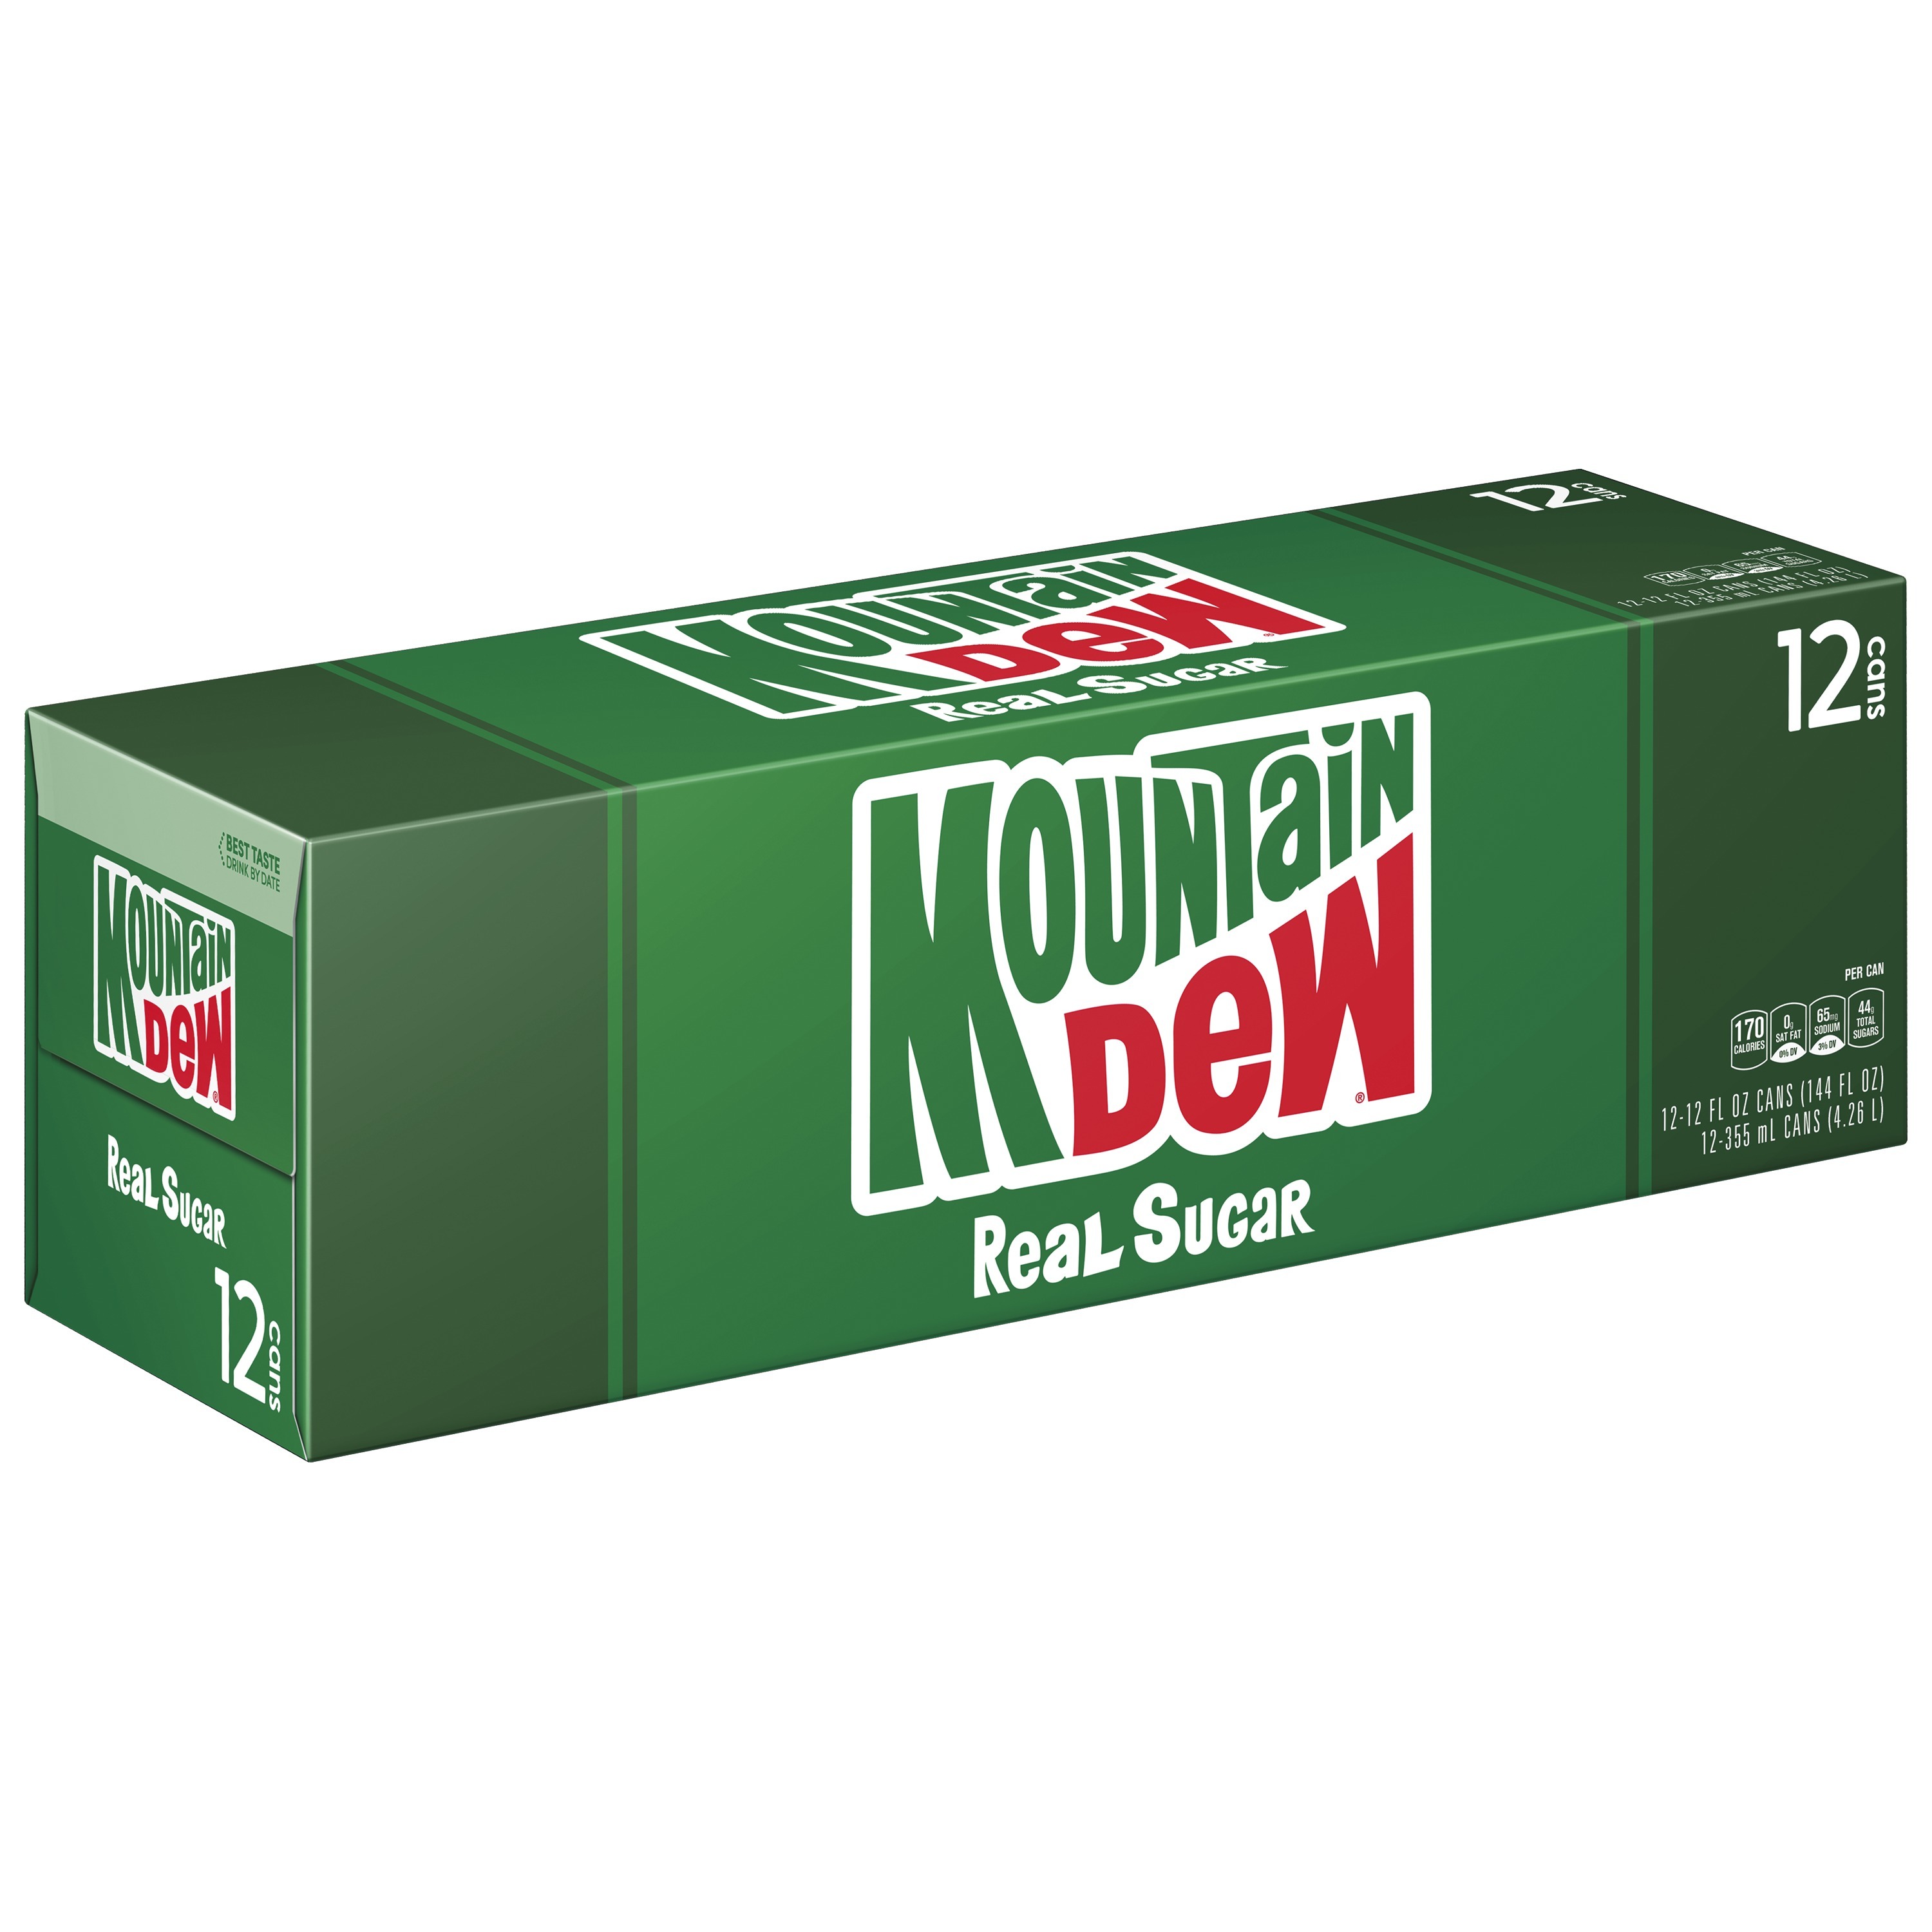 Mountain Dew Throwback with Real Sugar Soda Pop, 12 fl oz, 12 Pack Cans - image 3 of 5